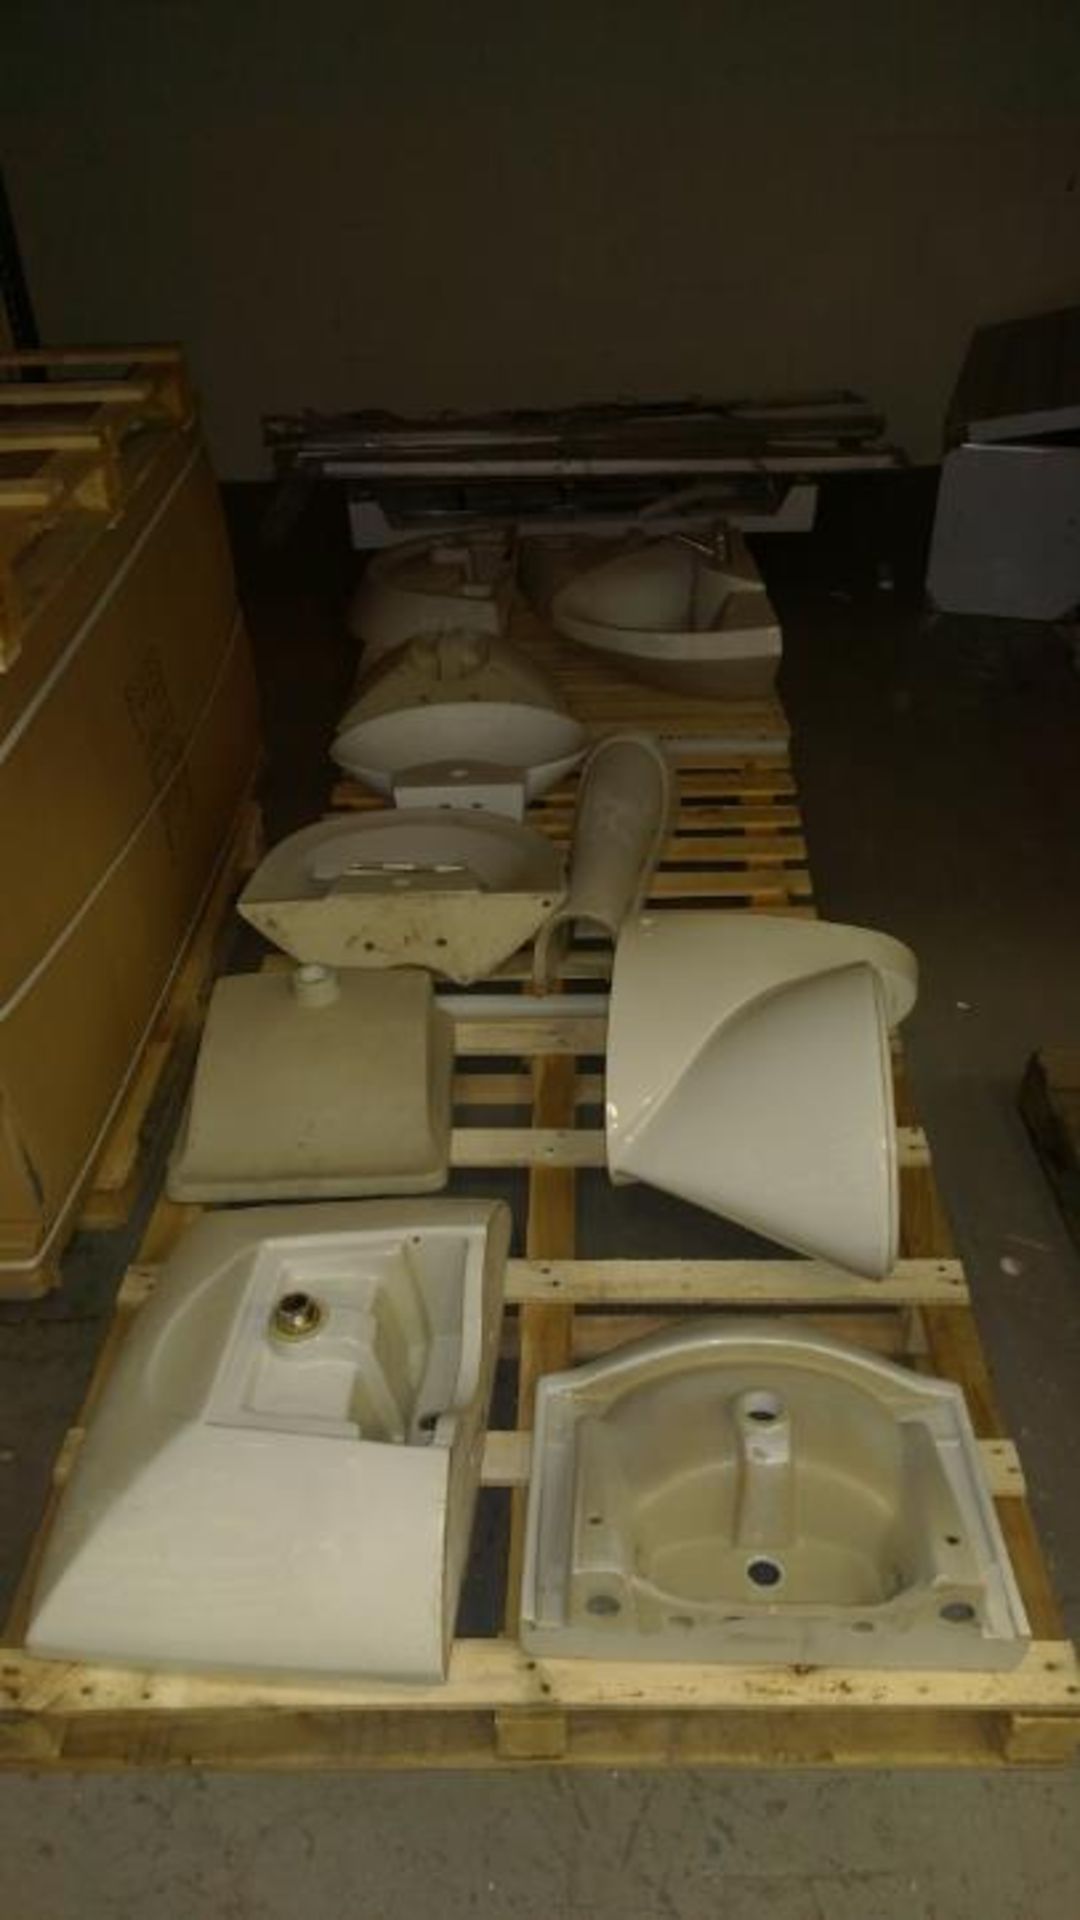 3x pallets of sinks, pedal stool + bidet, all high quality, all new ex display  delivery possible on